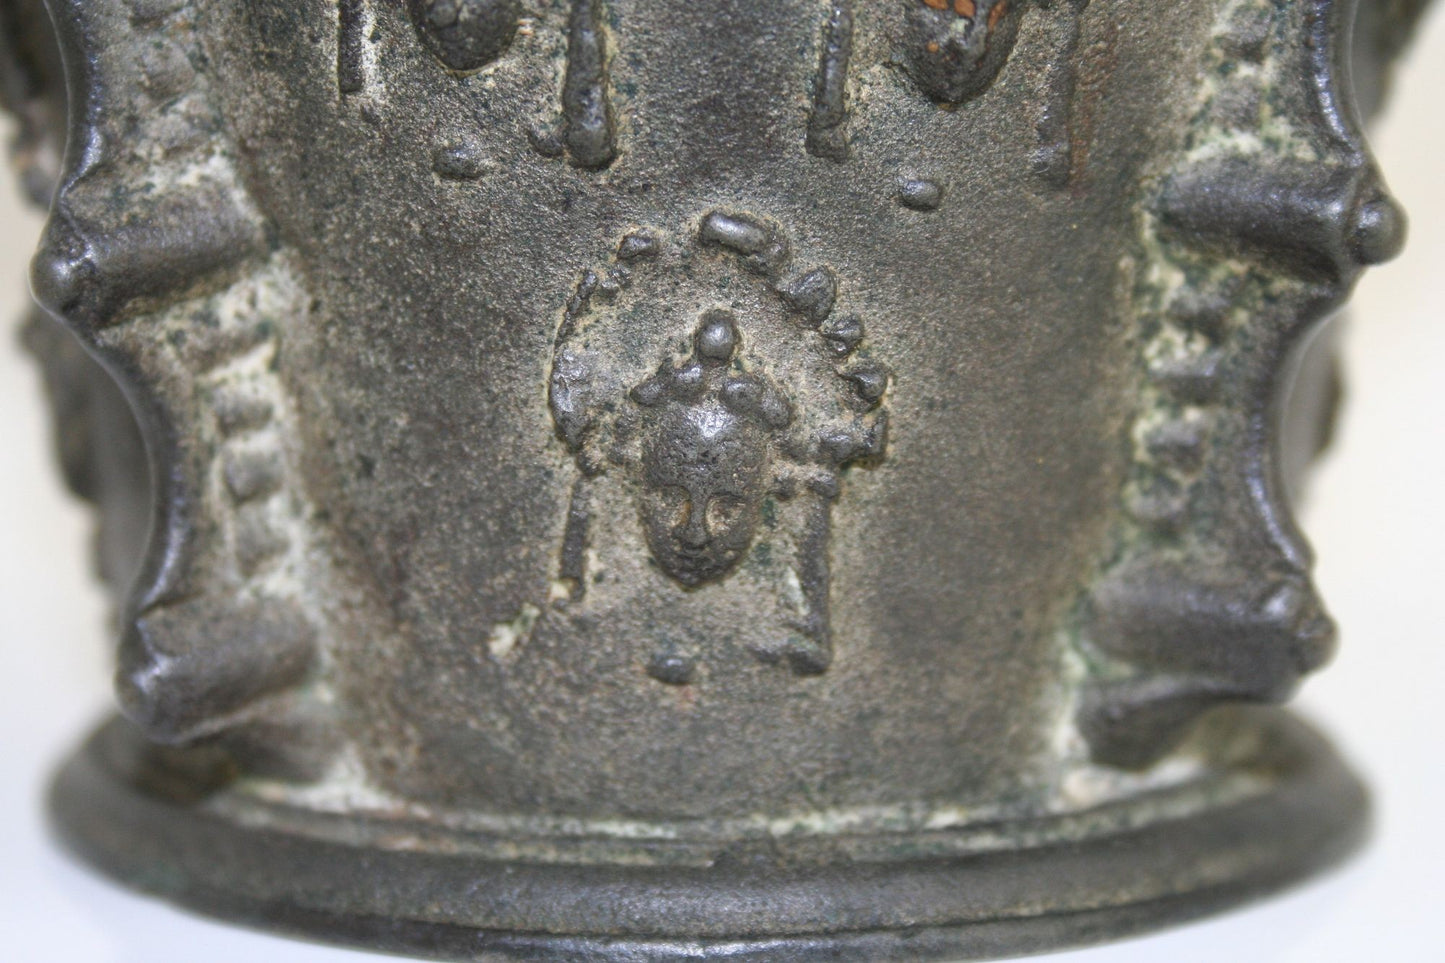 French Bronze Mortar, Early 17th Century